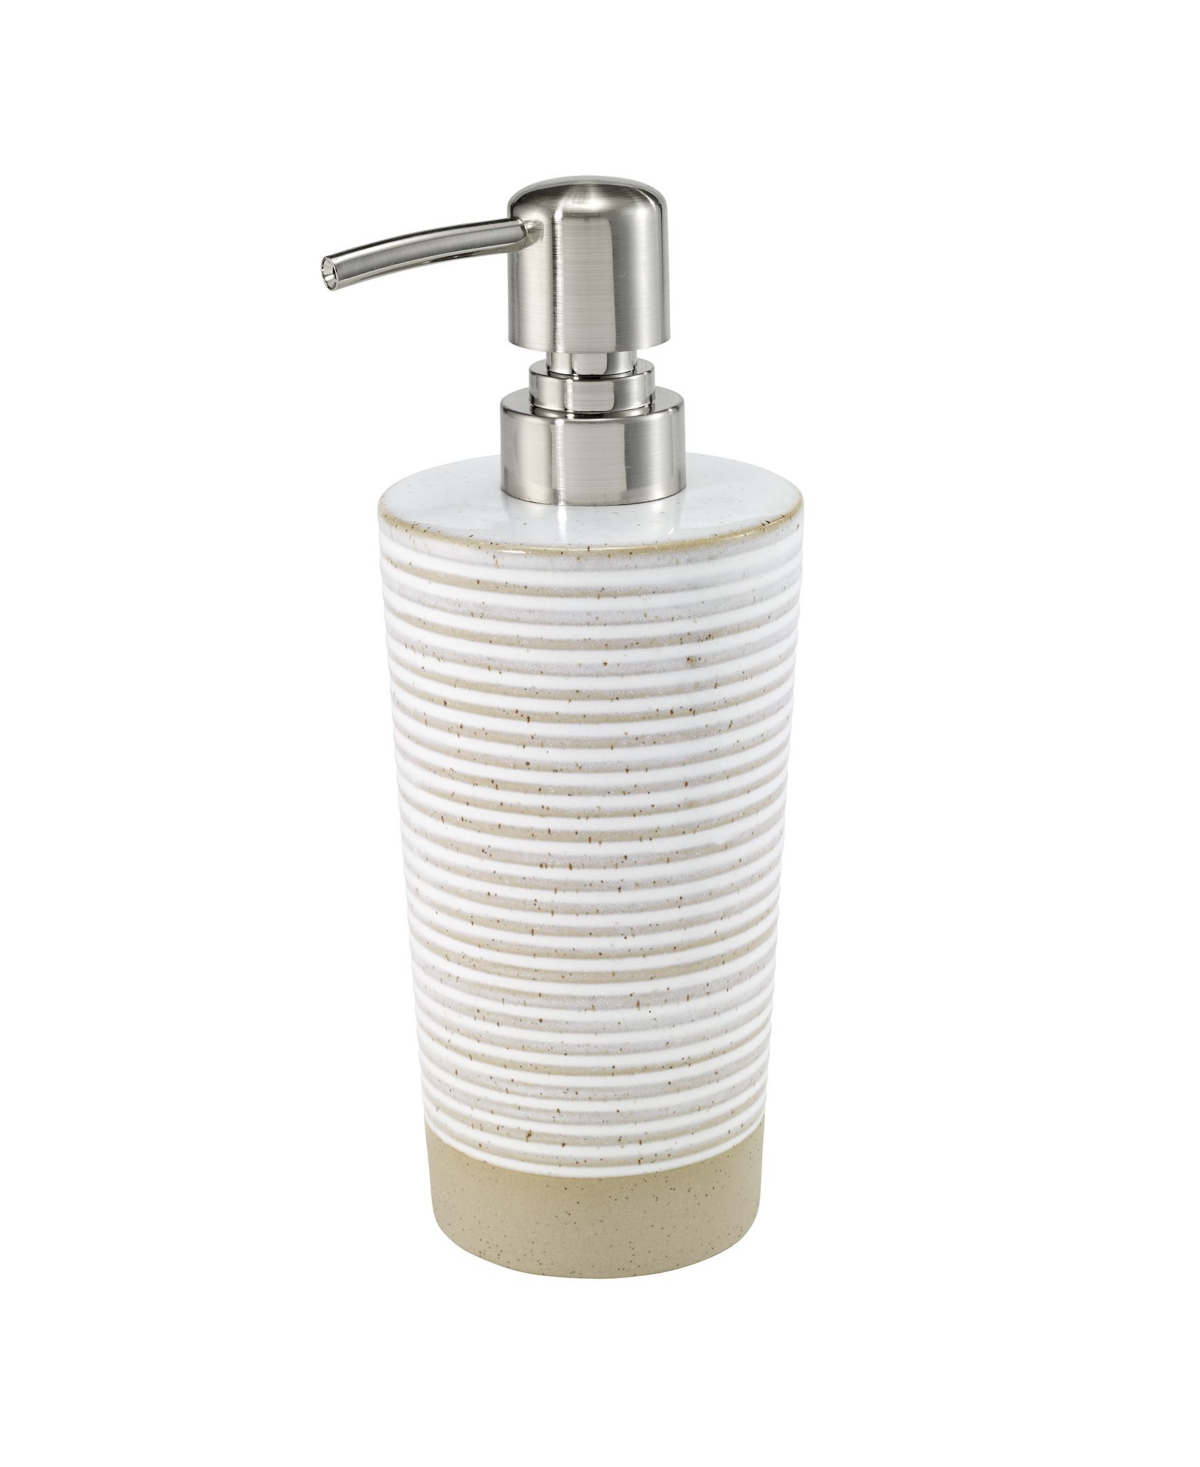 Drift Lines Textured Ribbed Ceramic Soap/Lotion Pump - Linen